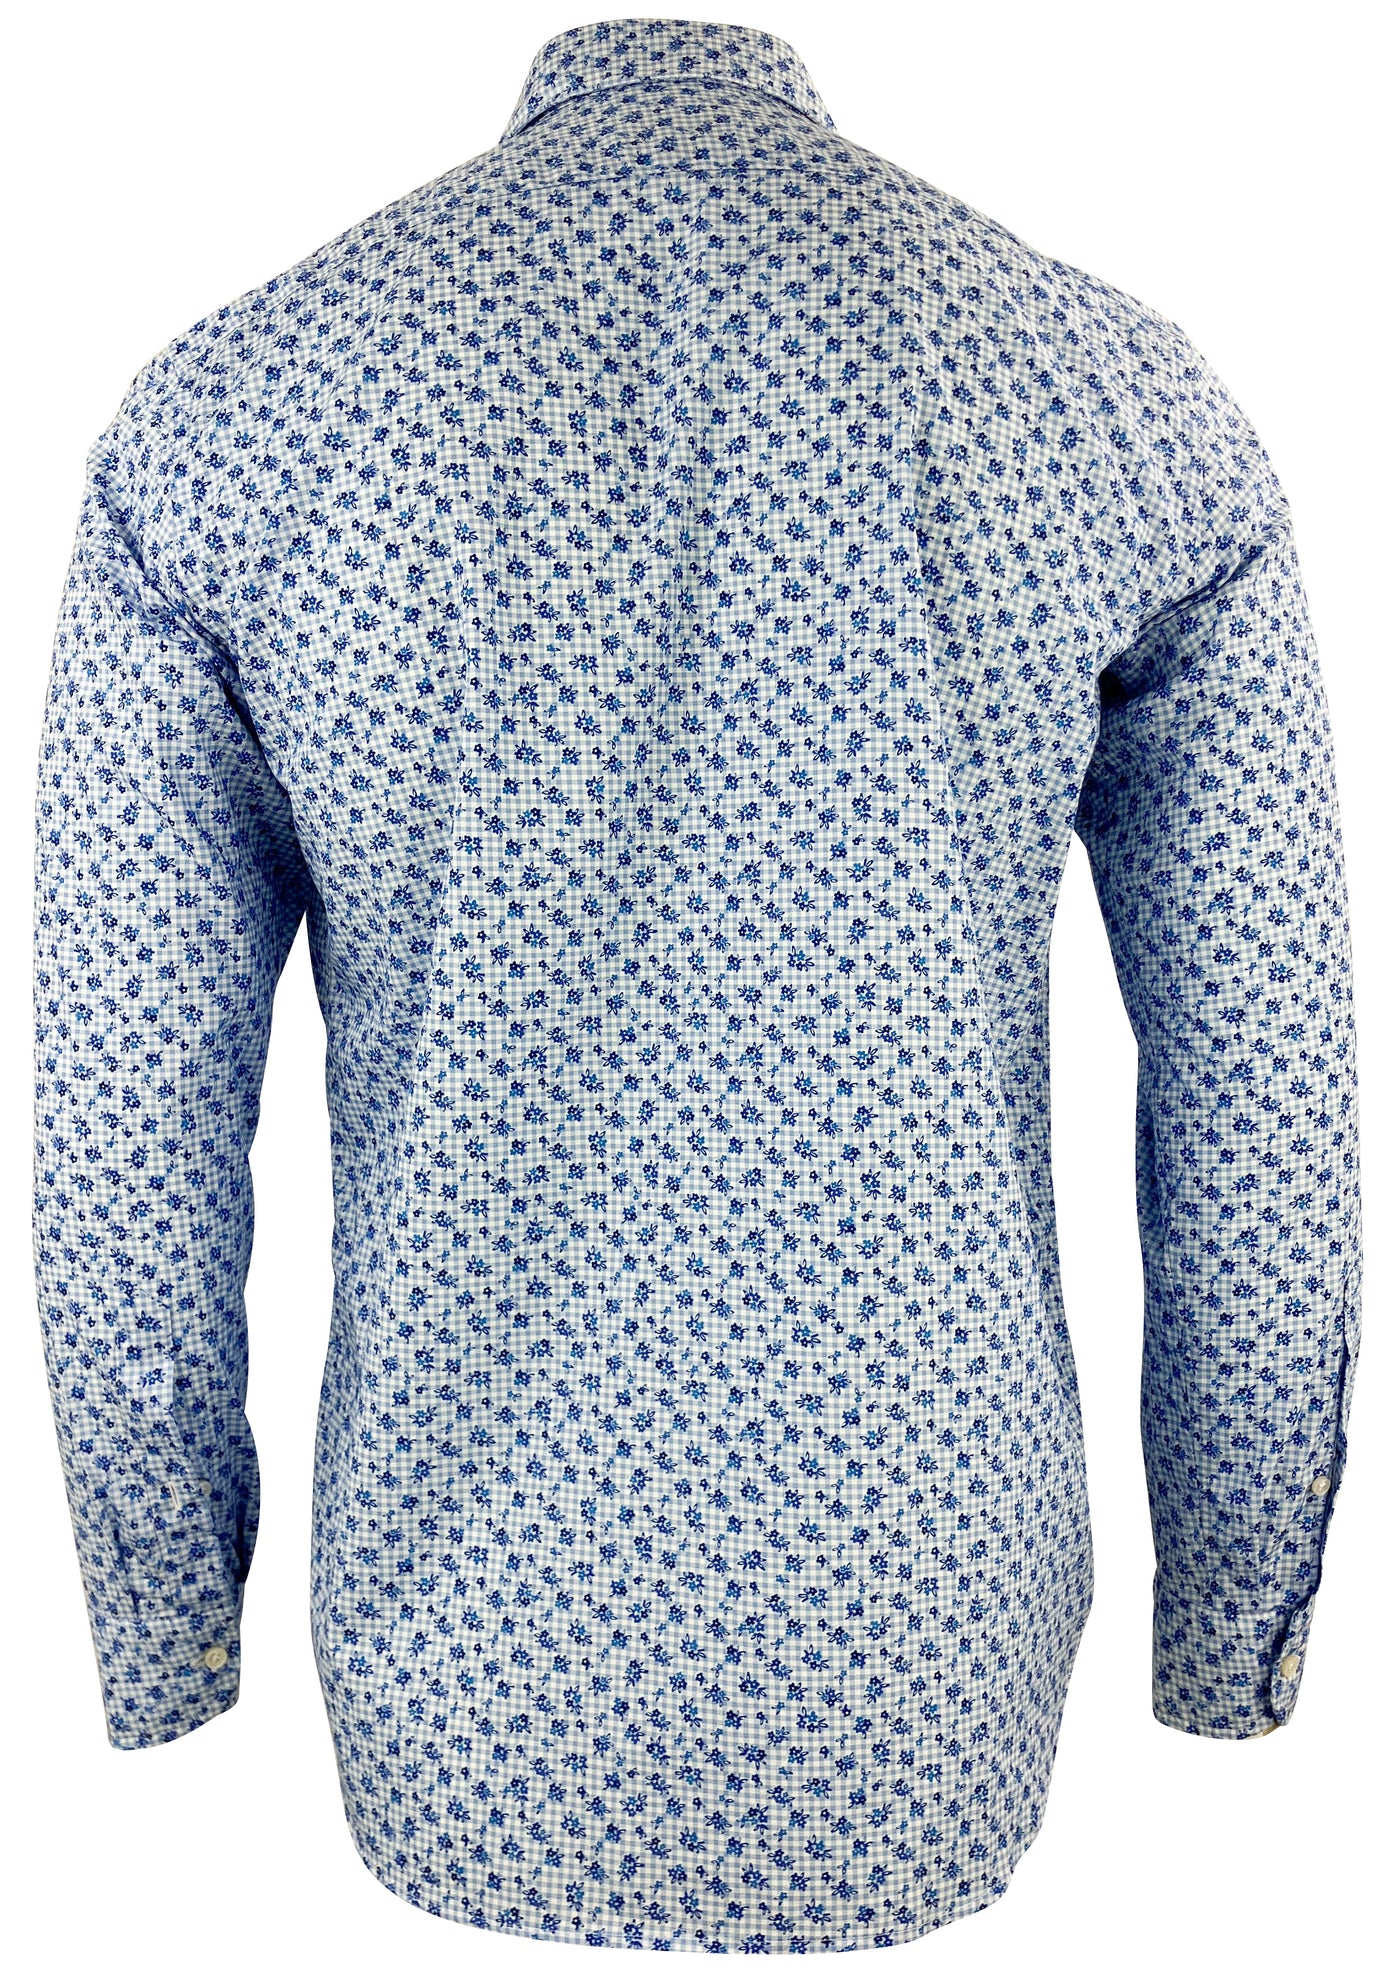 ORDEAN Floral Button Down in Blue - Discounts on ORDEAN at UAL